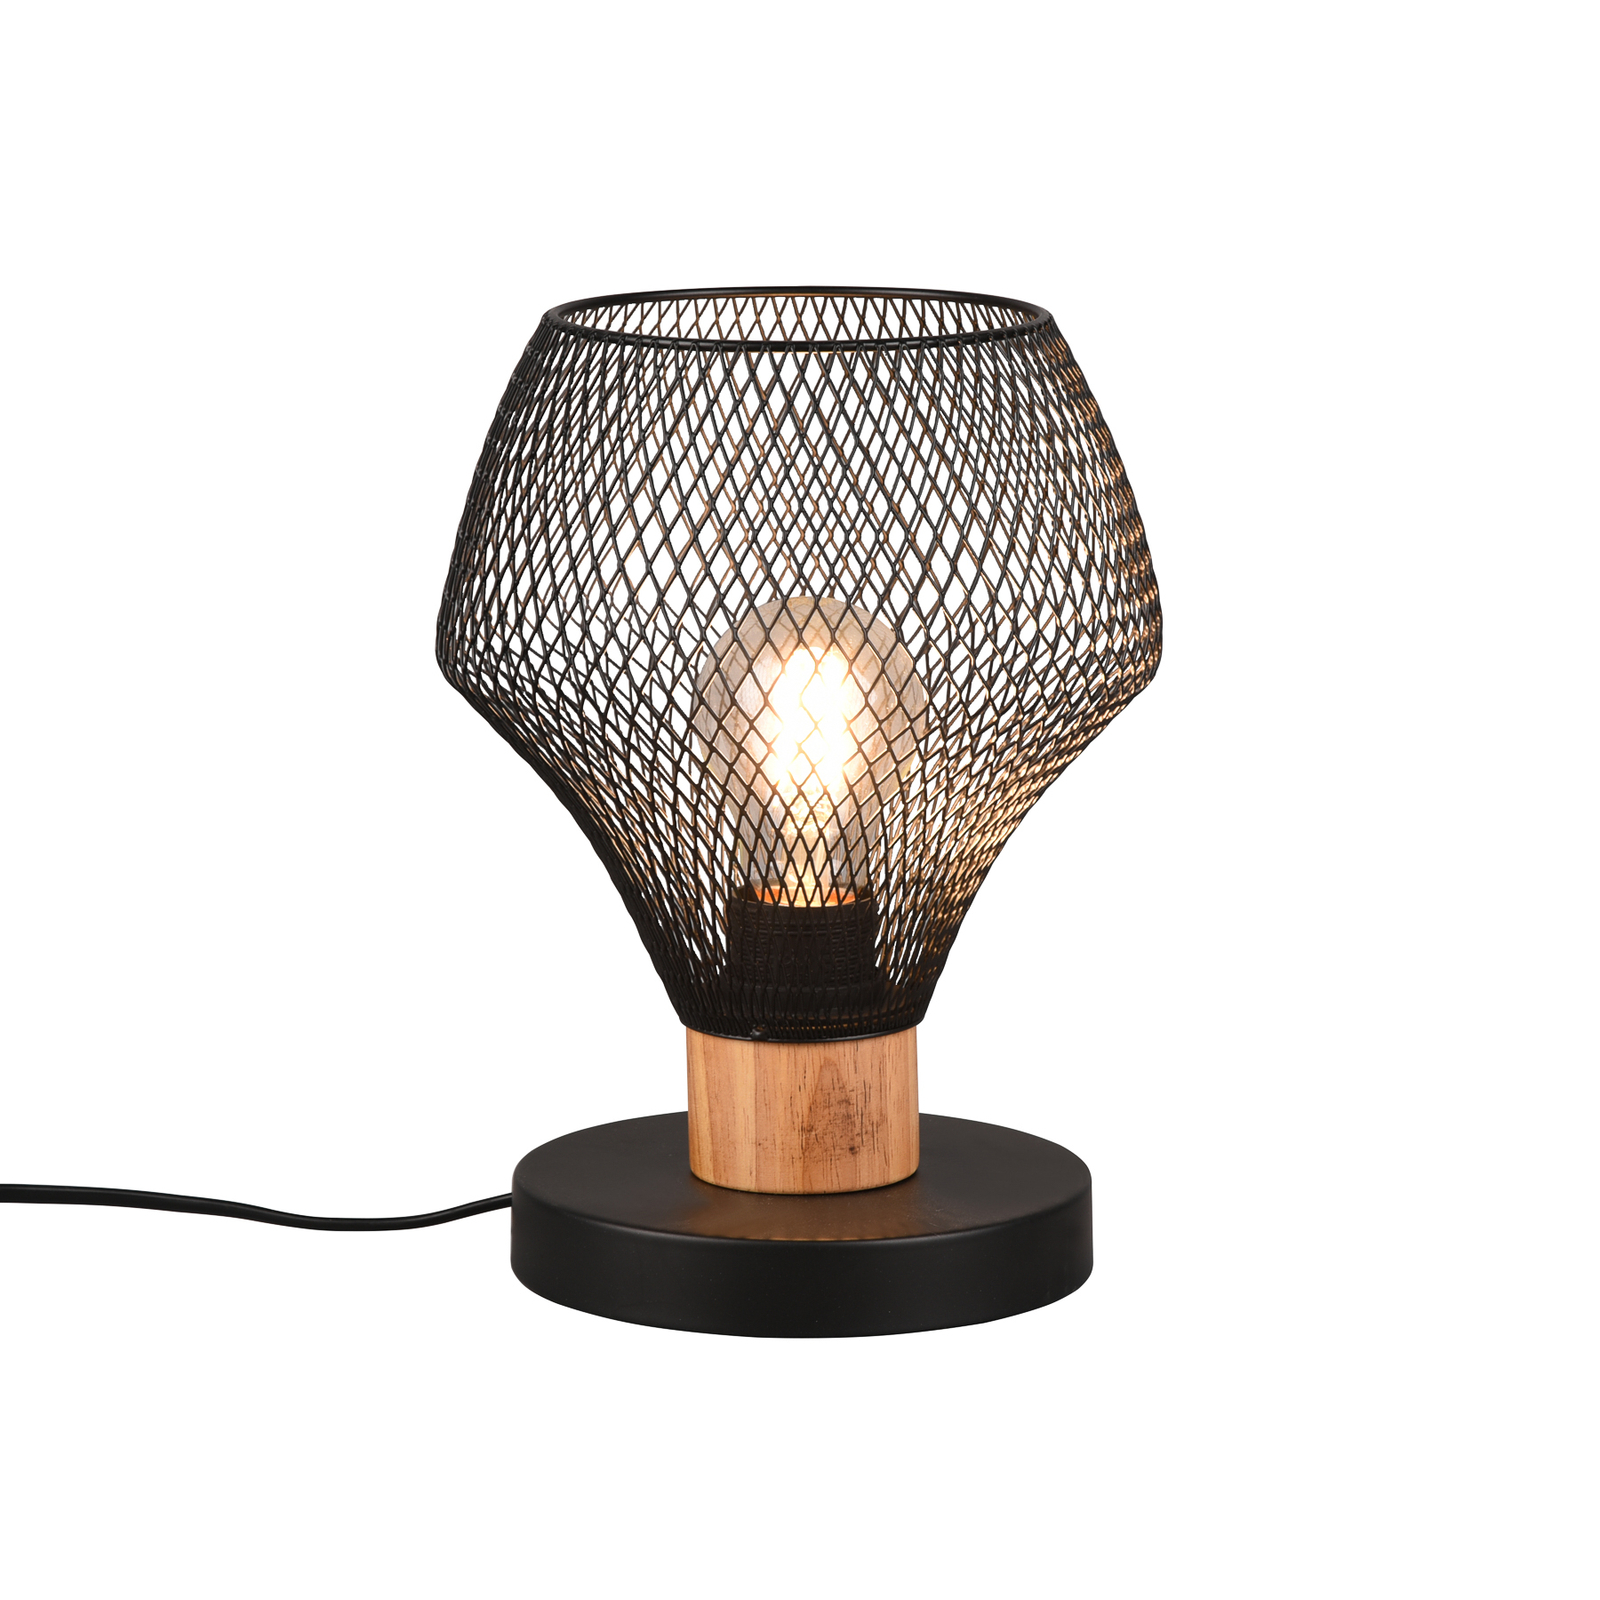 Valeria table lamp with a latticed lampshade